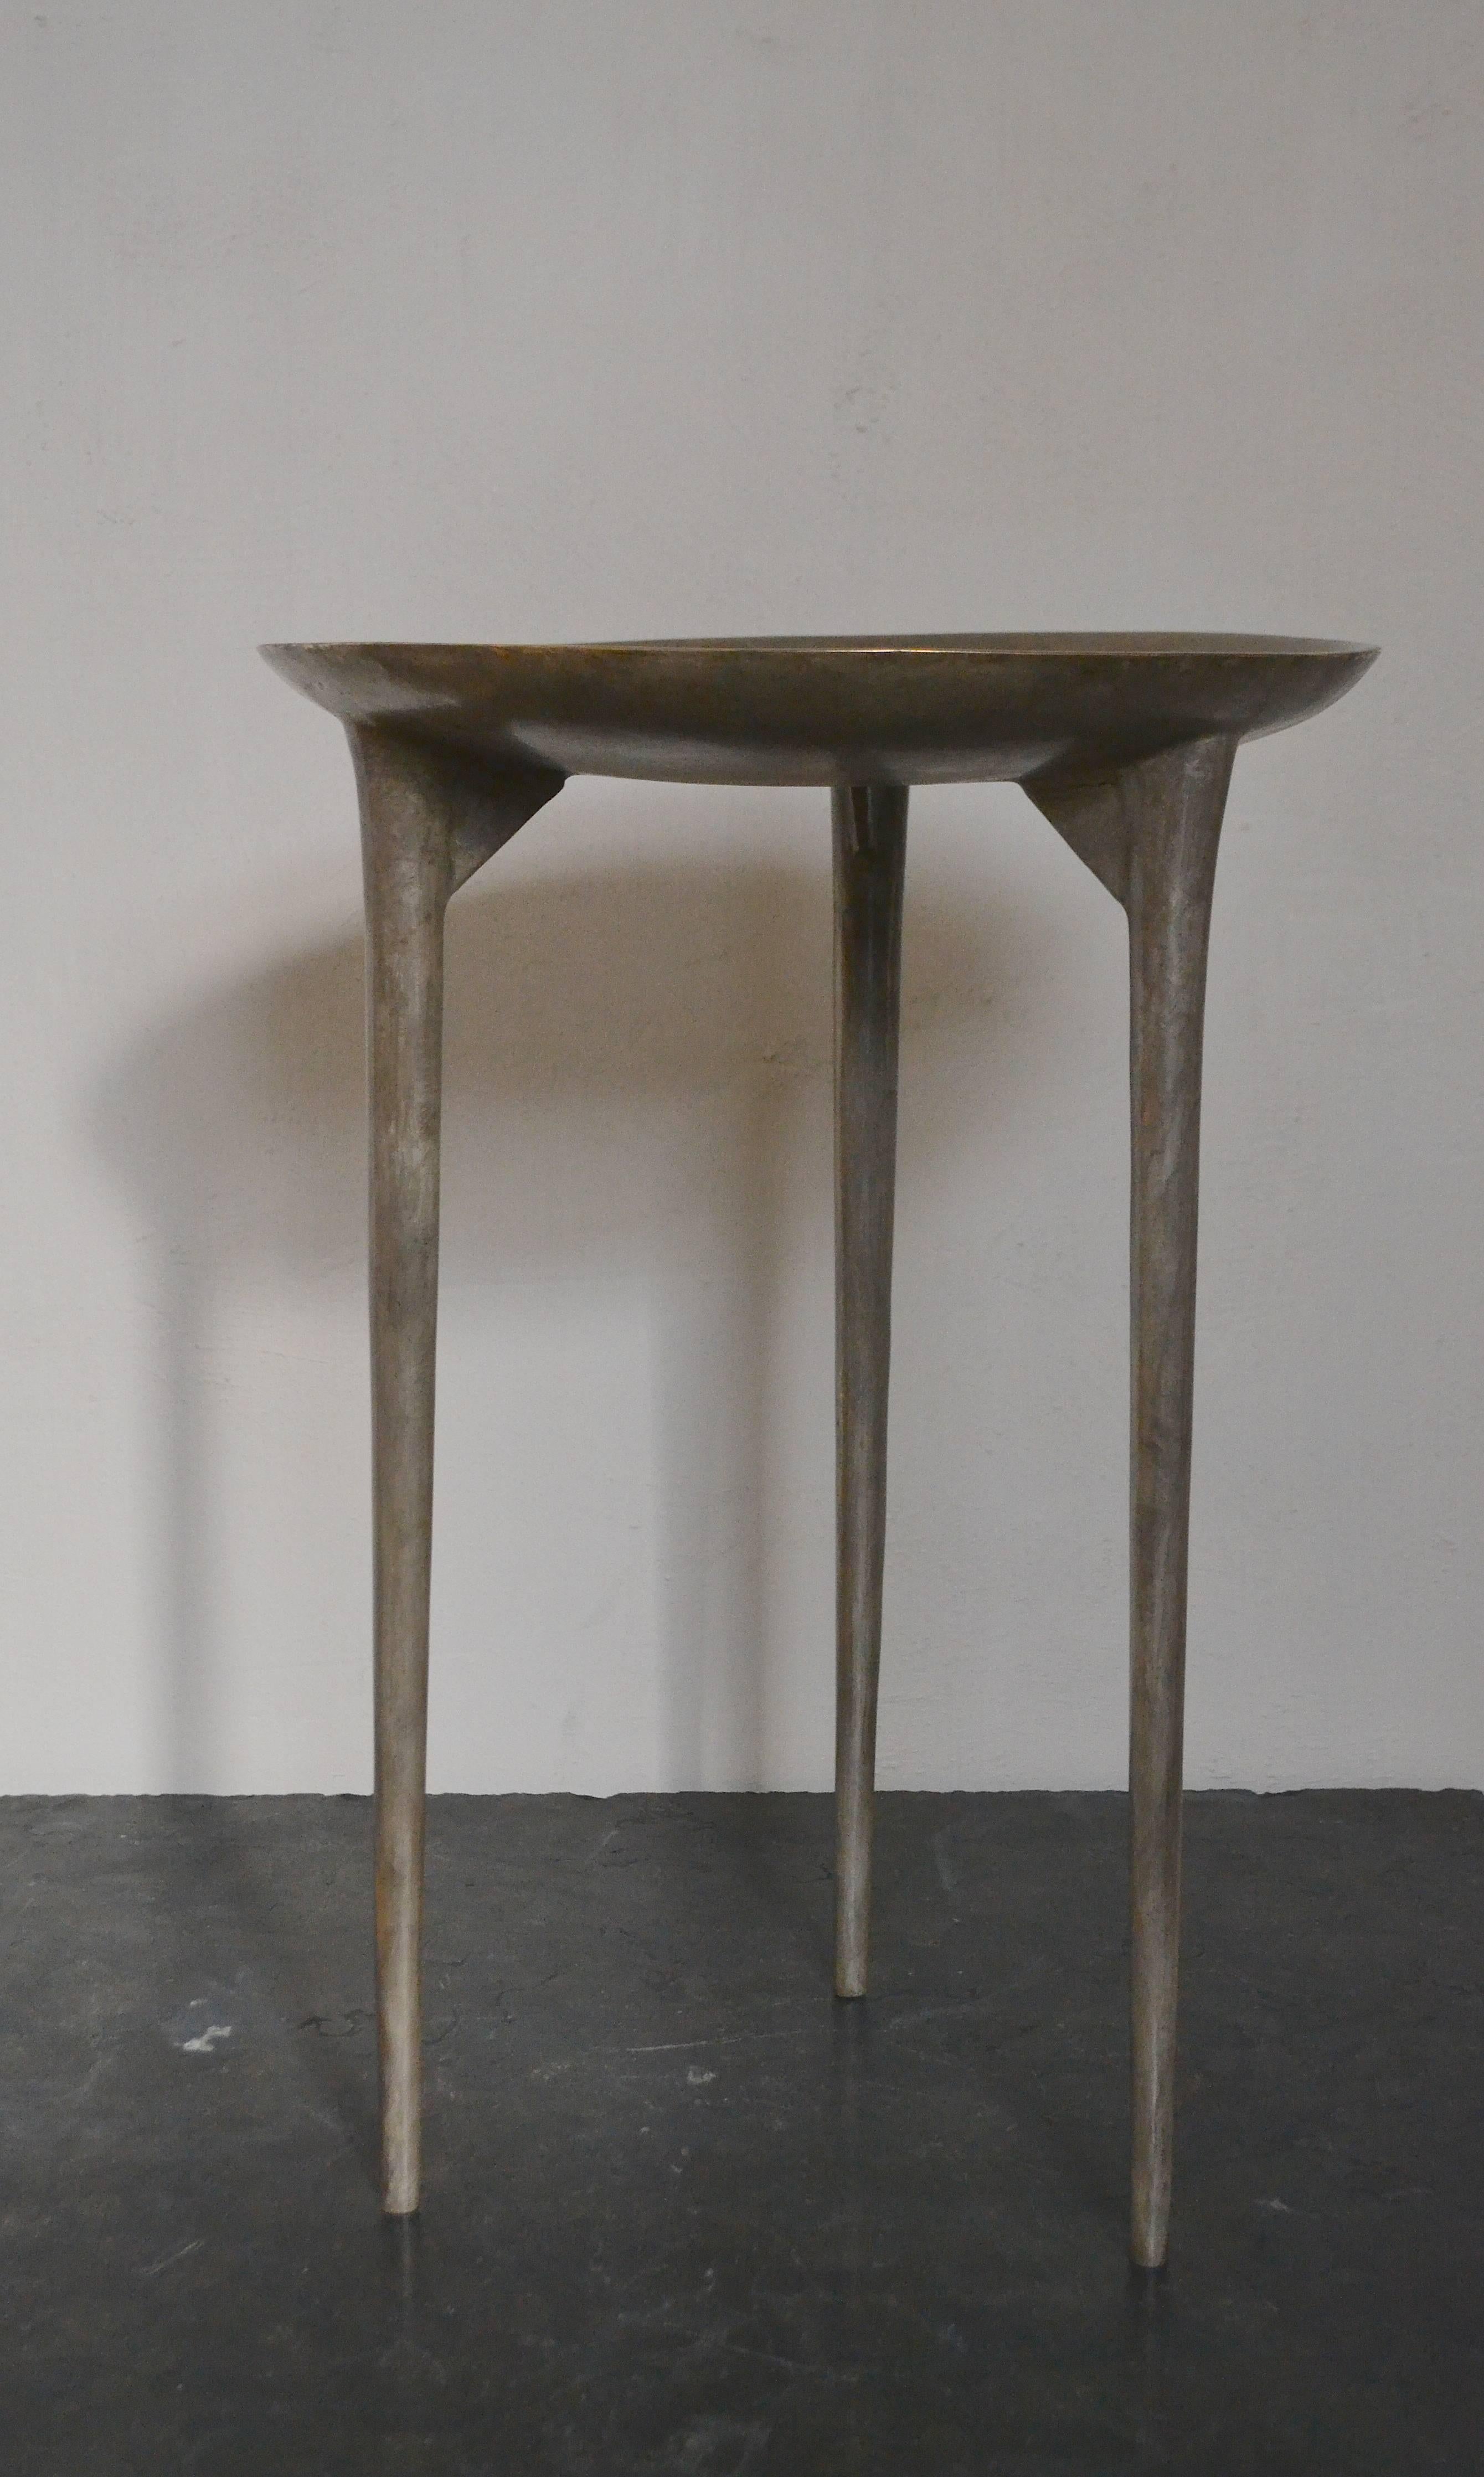 Rick Owens 'Brazier' three-legged table in solid bronze in a light color.
The price on this piece is incl. Danish vat